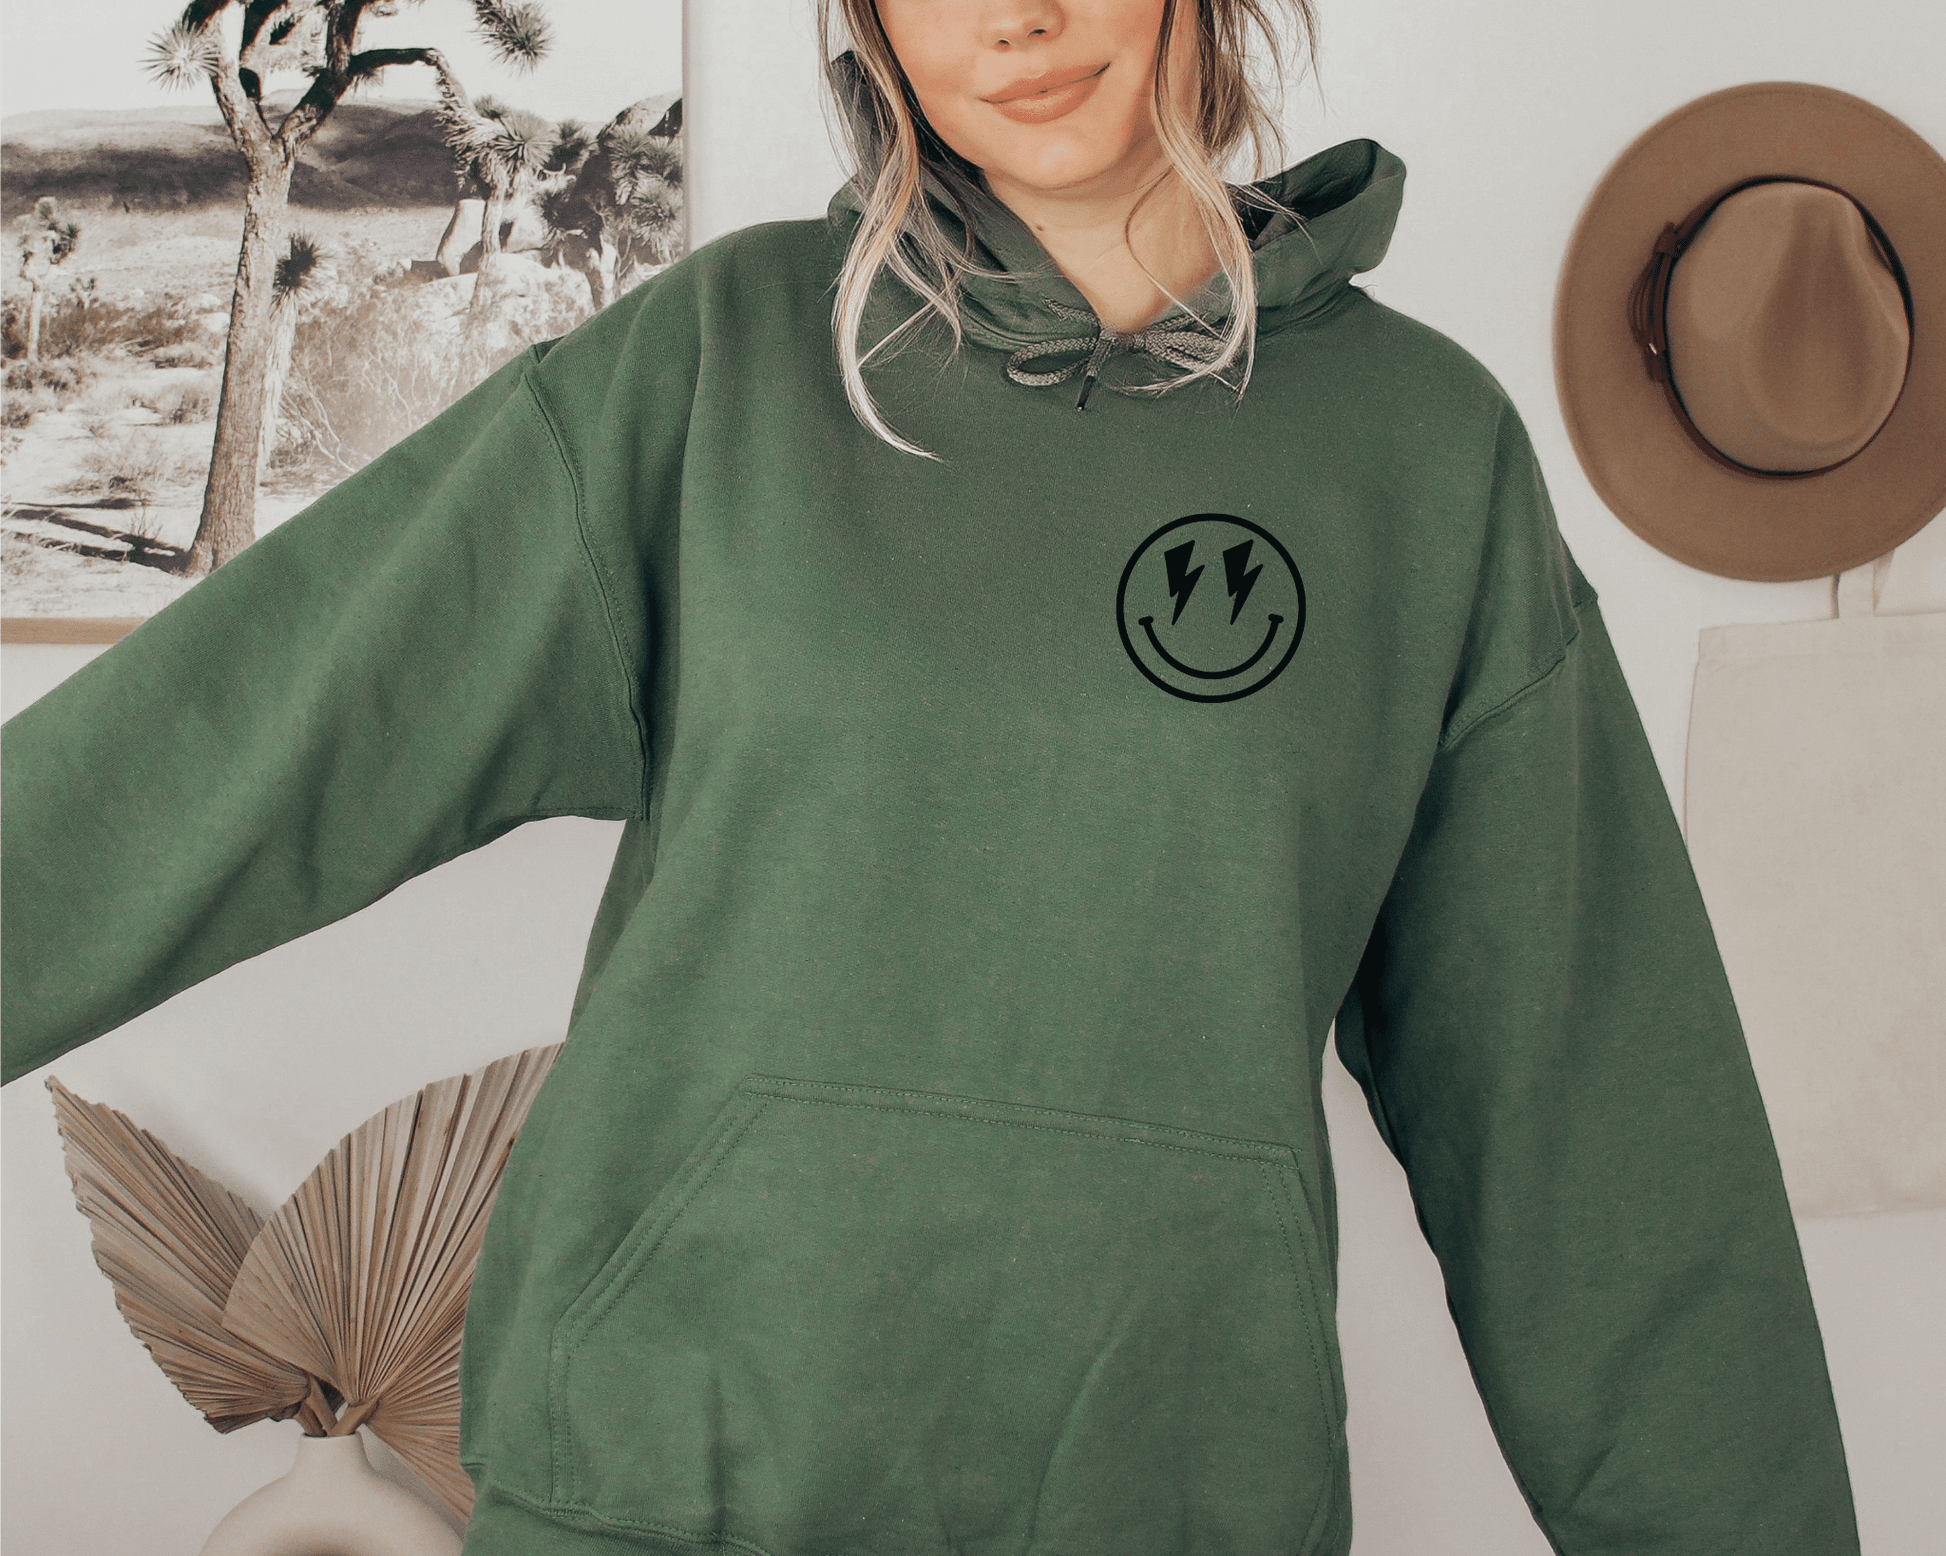 Don't Trip Over What's Behind You Hoodie in Military Green, front of hoodie.